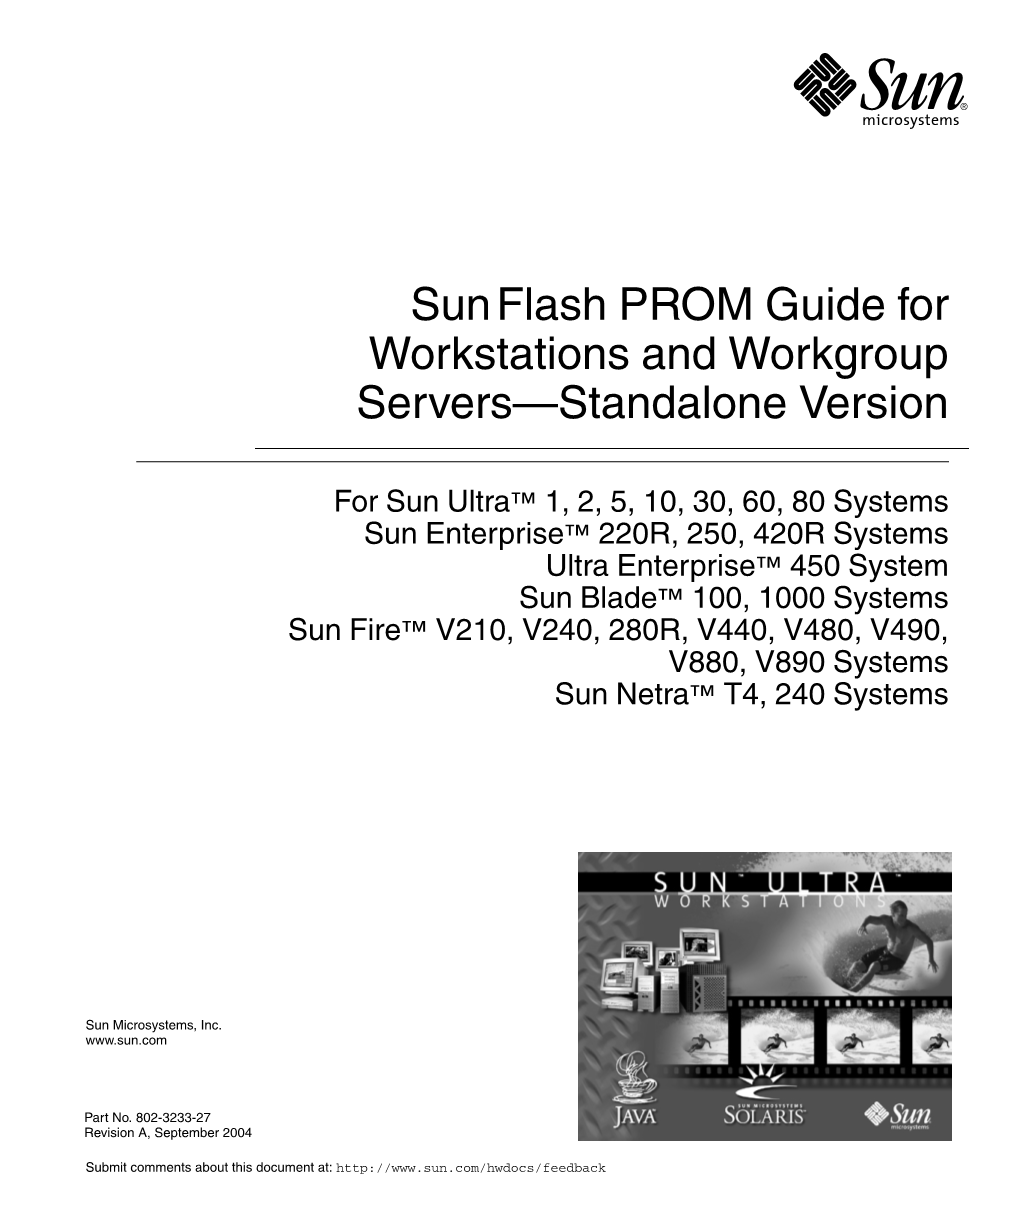 Sun Flash PROM Guide for Workstations and Workgroup Servers—Standalone Version